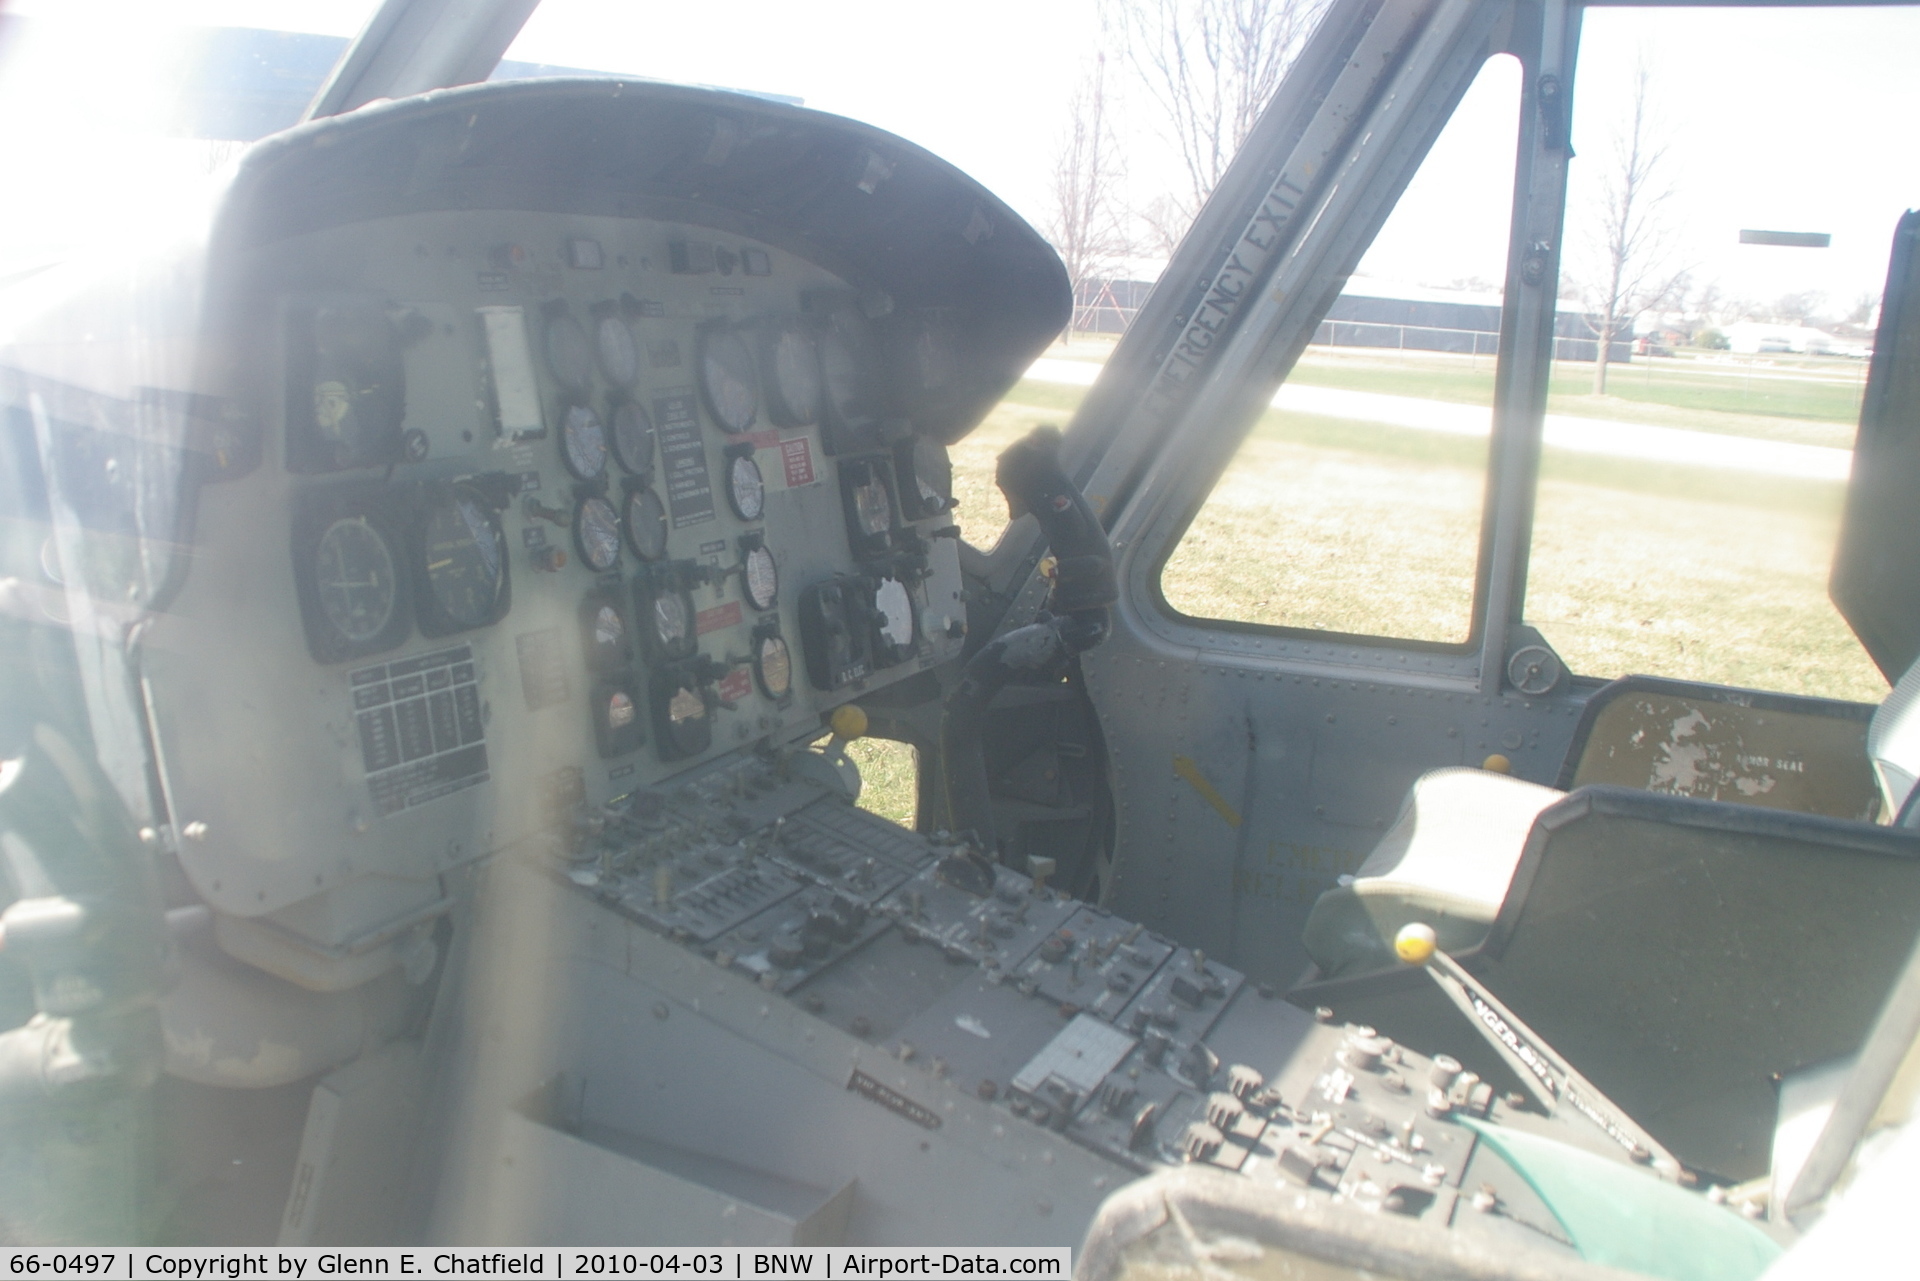 66-0497, 1966 Bell UH-1M Iroquois C/N 1479, Instrument panel still pretty much intact